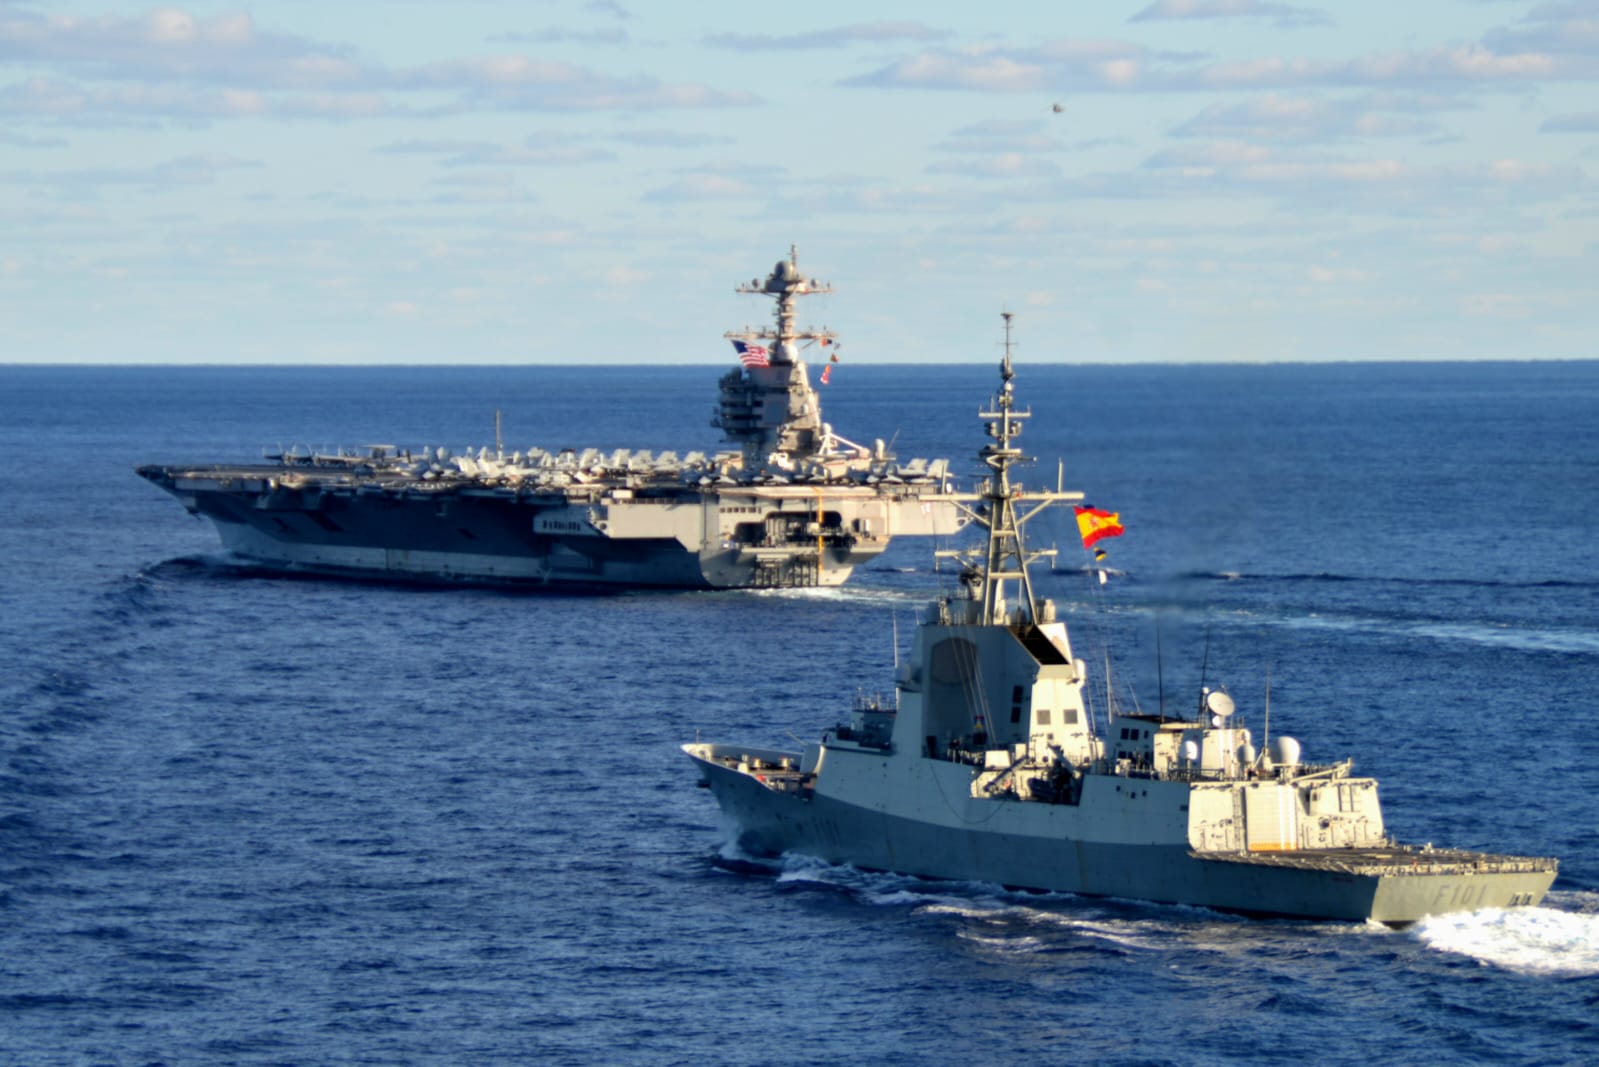 The Spanish frigate next to the aircraft carrier